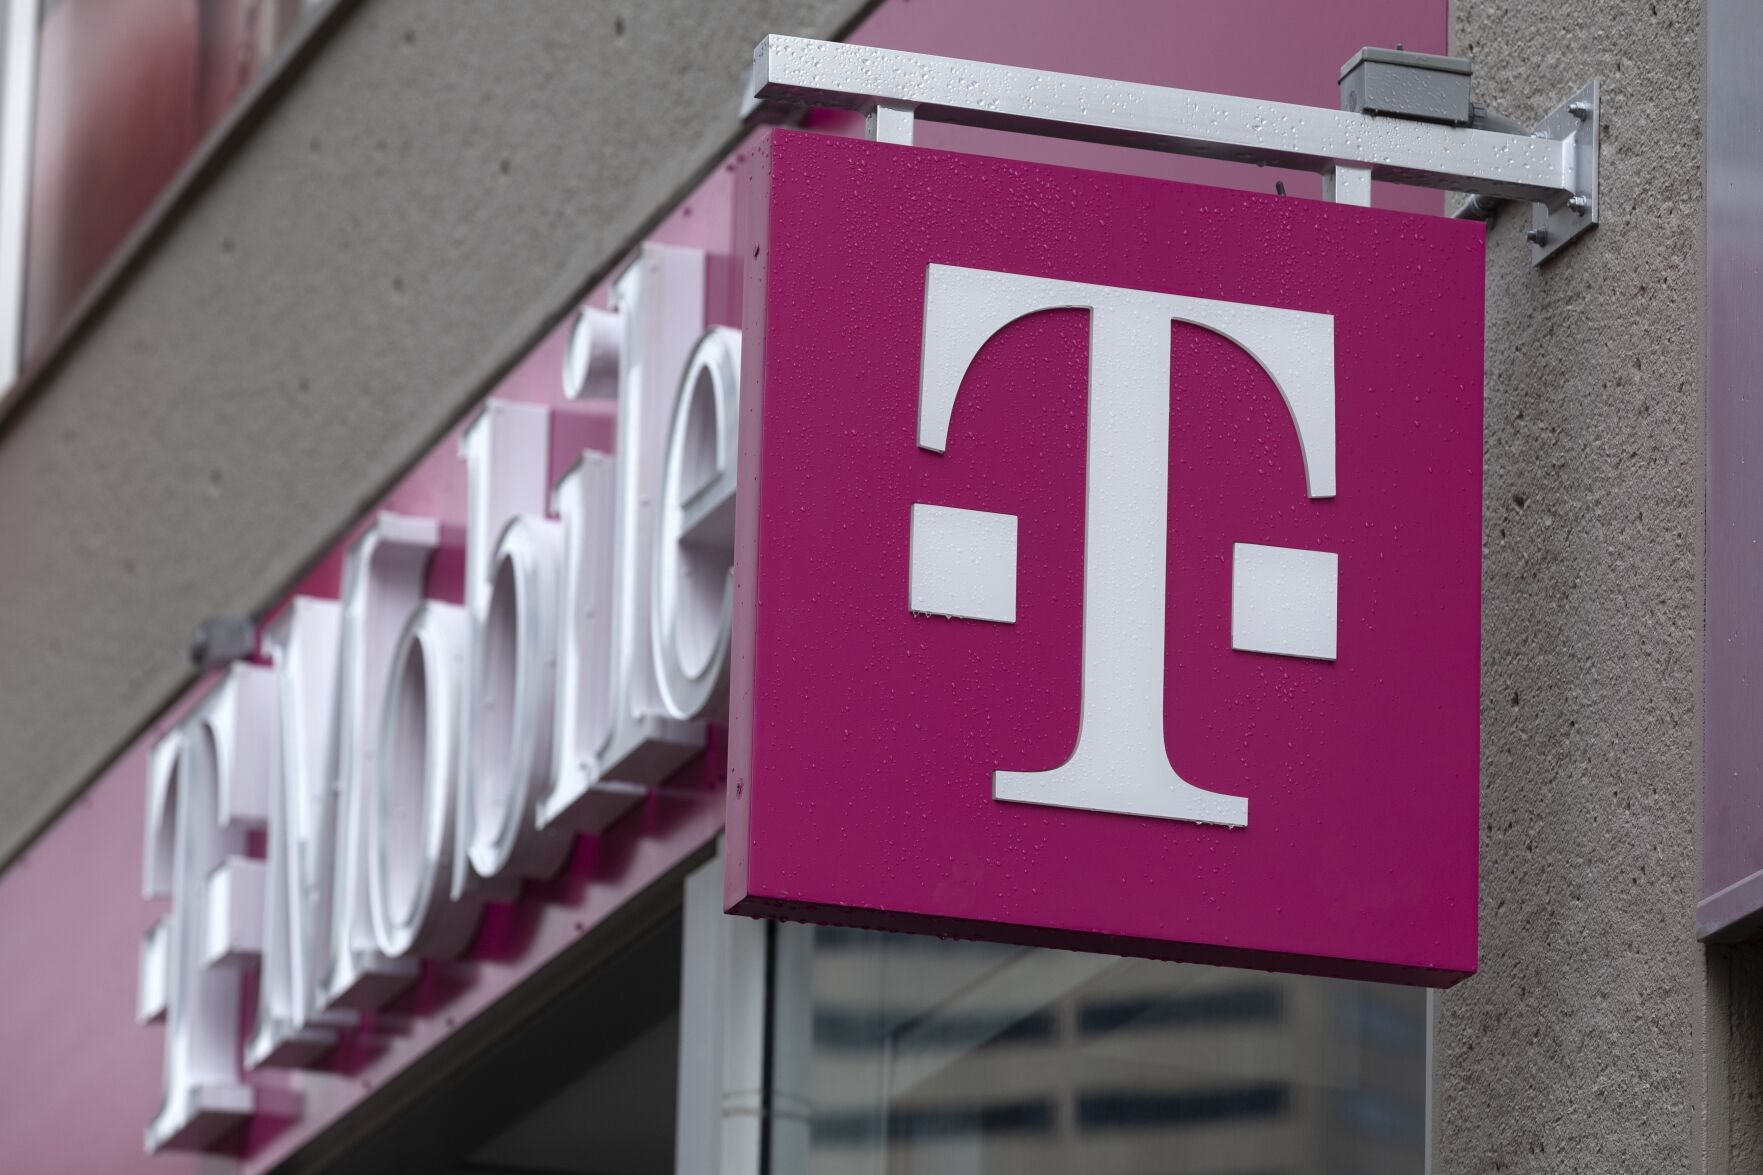 <p>FILE - The T-Mobile logo is seen on a storefront, on Oct. 14, 2022, in Boston. Customers of the wireless provider reported widespread service outages in the U.S. late Monday, Feb. 13, 2023, according to websites tracking service interruptions. (AP Photo/Michael Dwyer, File)</p>   PHOTO CREDIT: Michael Dwyer 